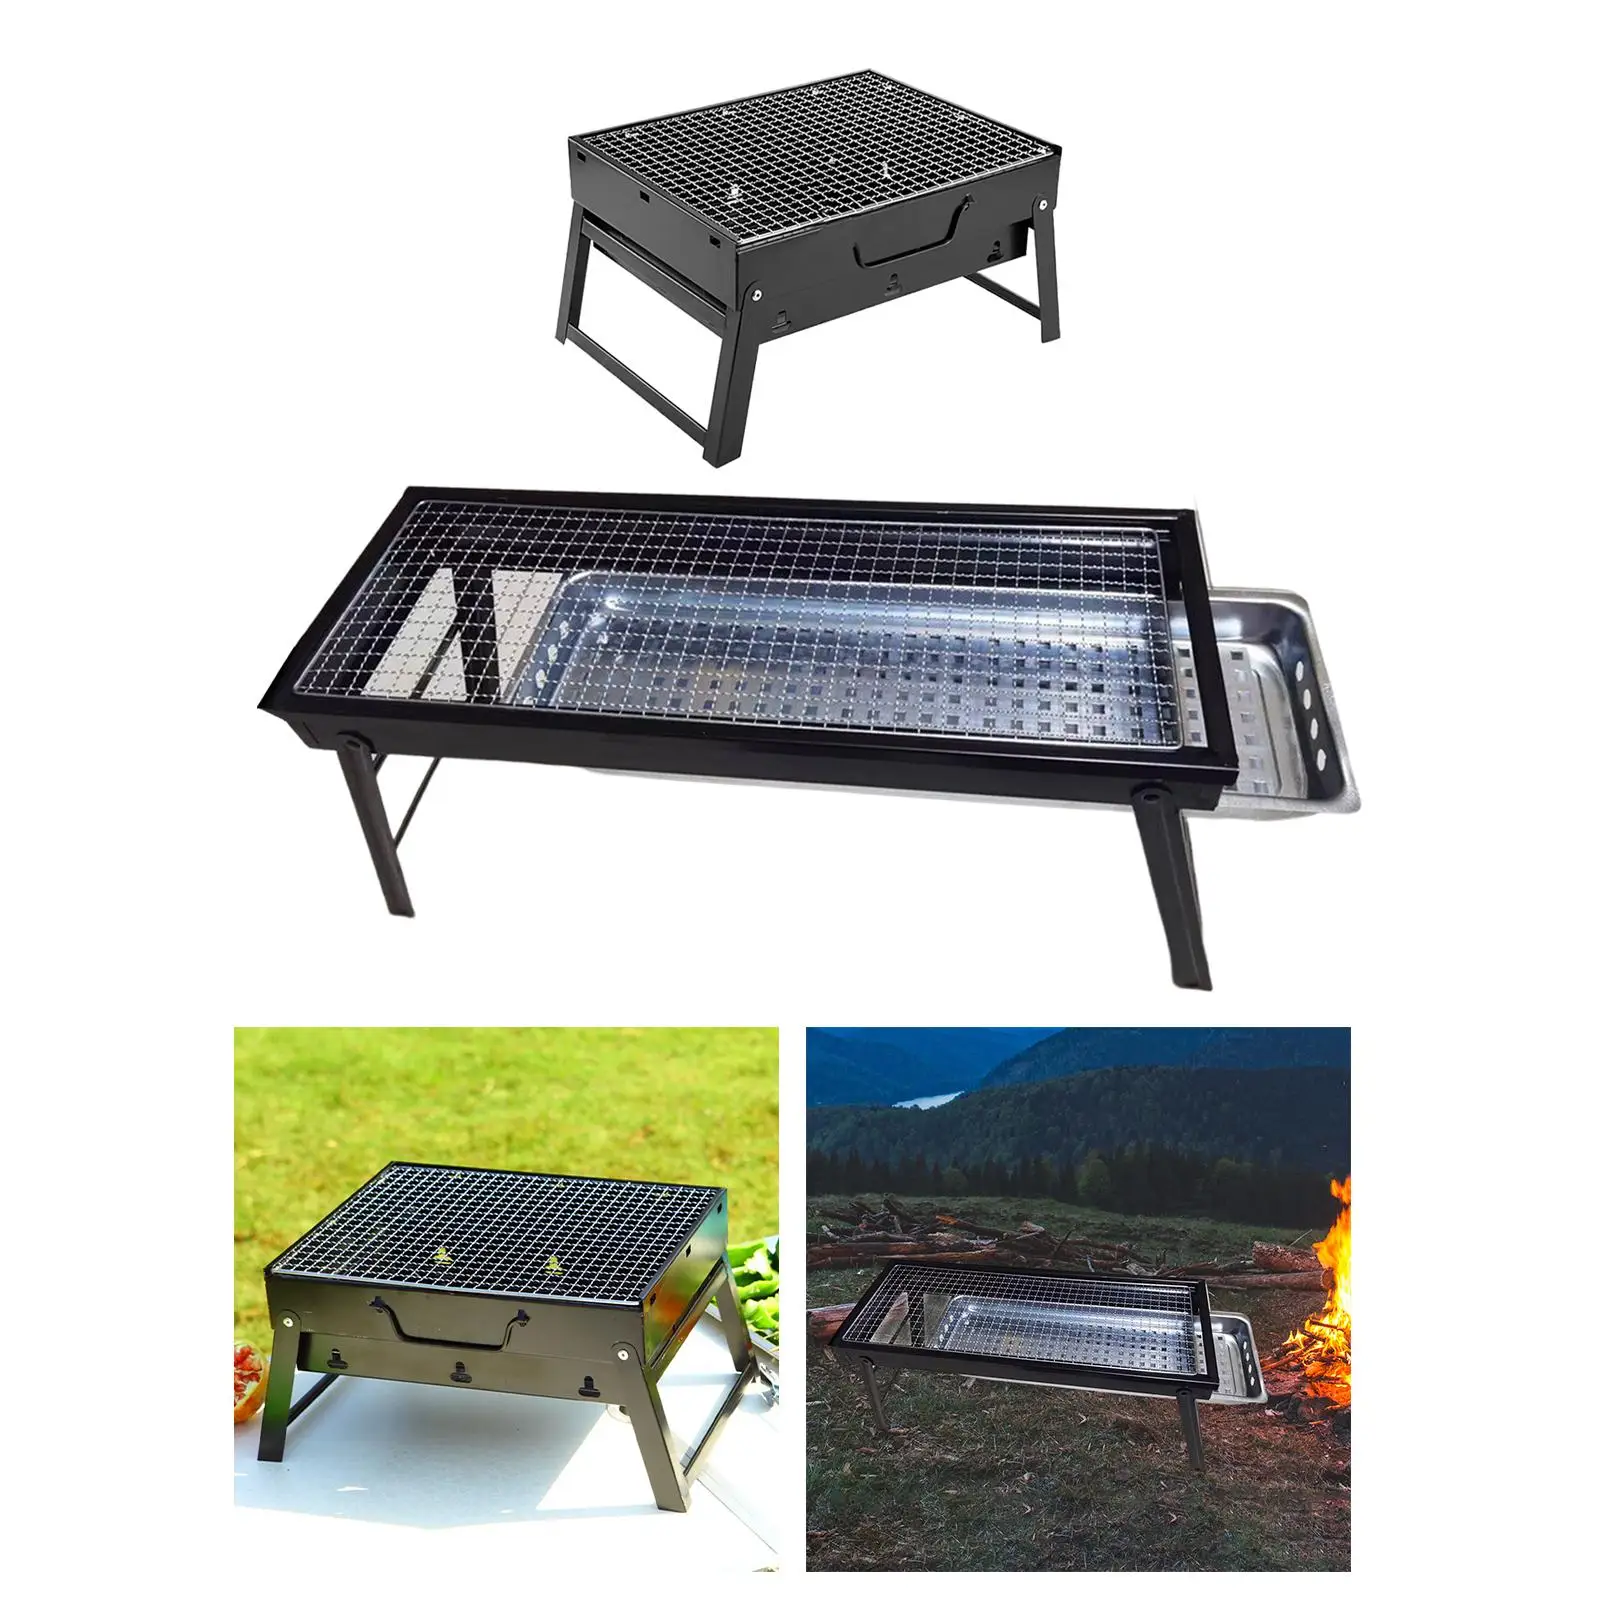 BBQ Grill Stove Foldable Cooking Tabletop Equipment Travel Household Hiking